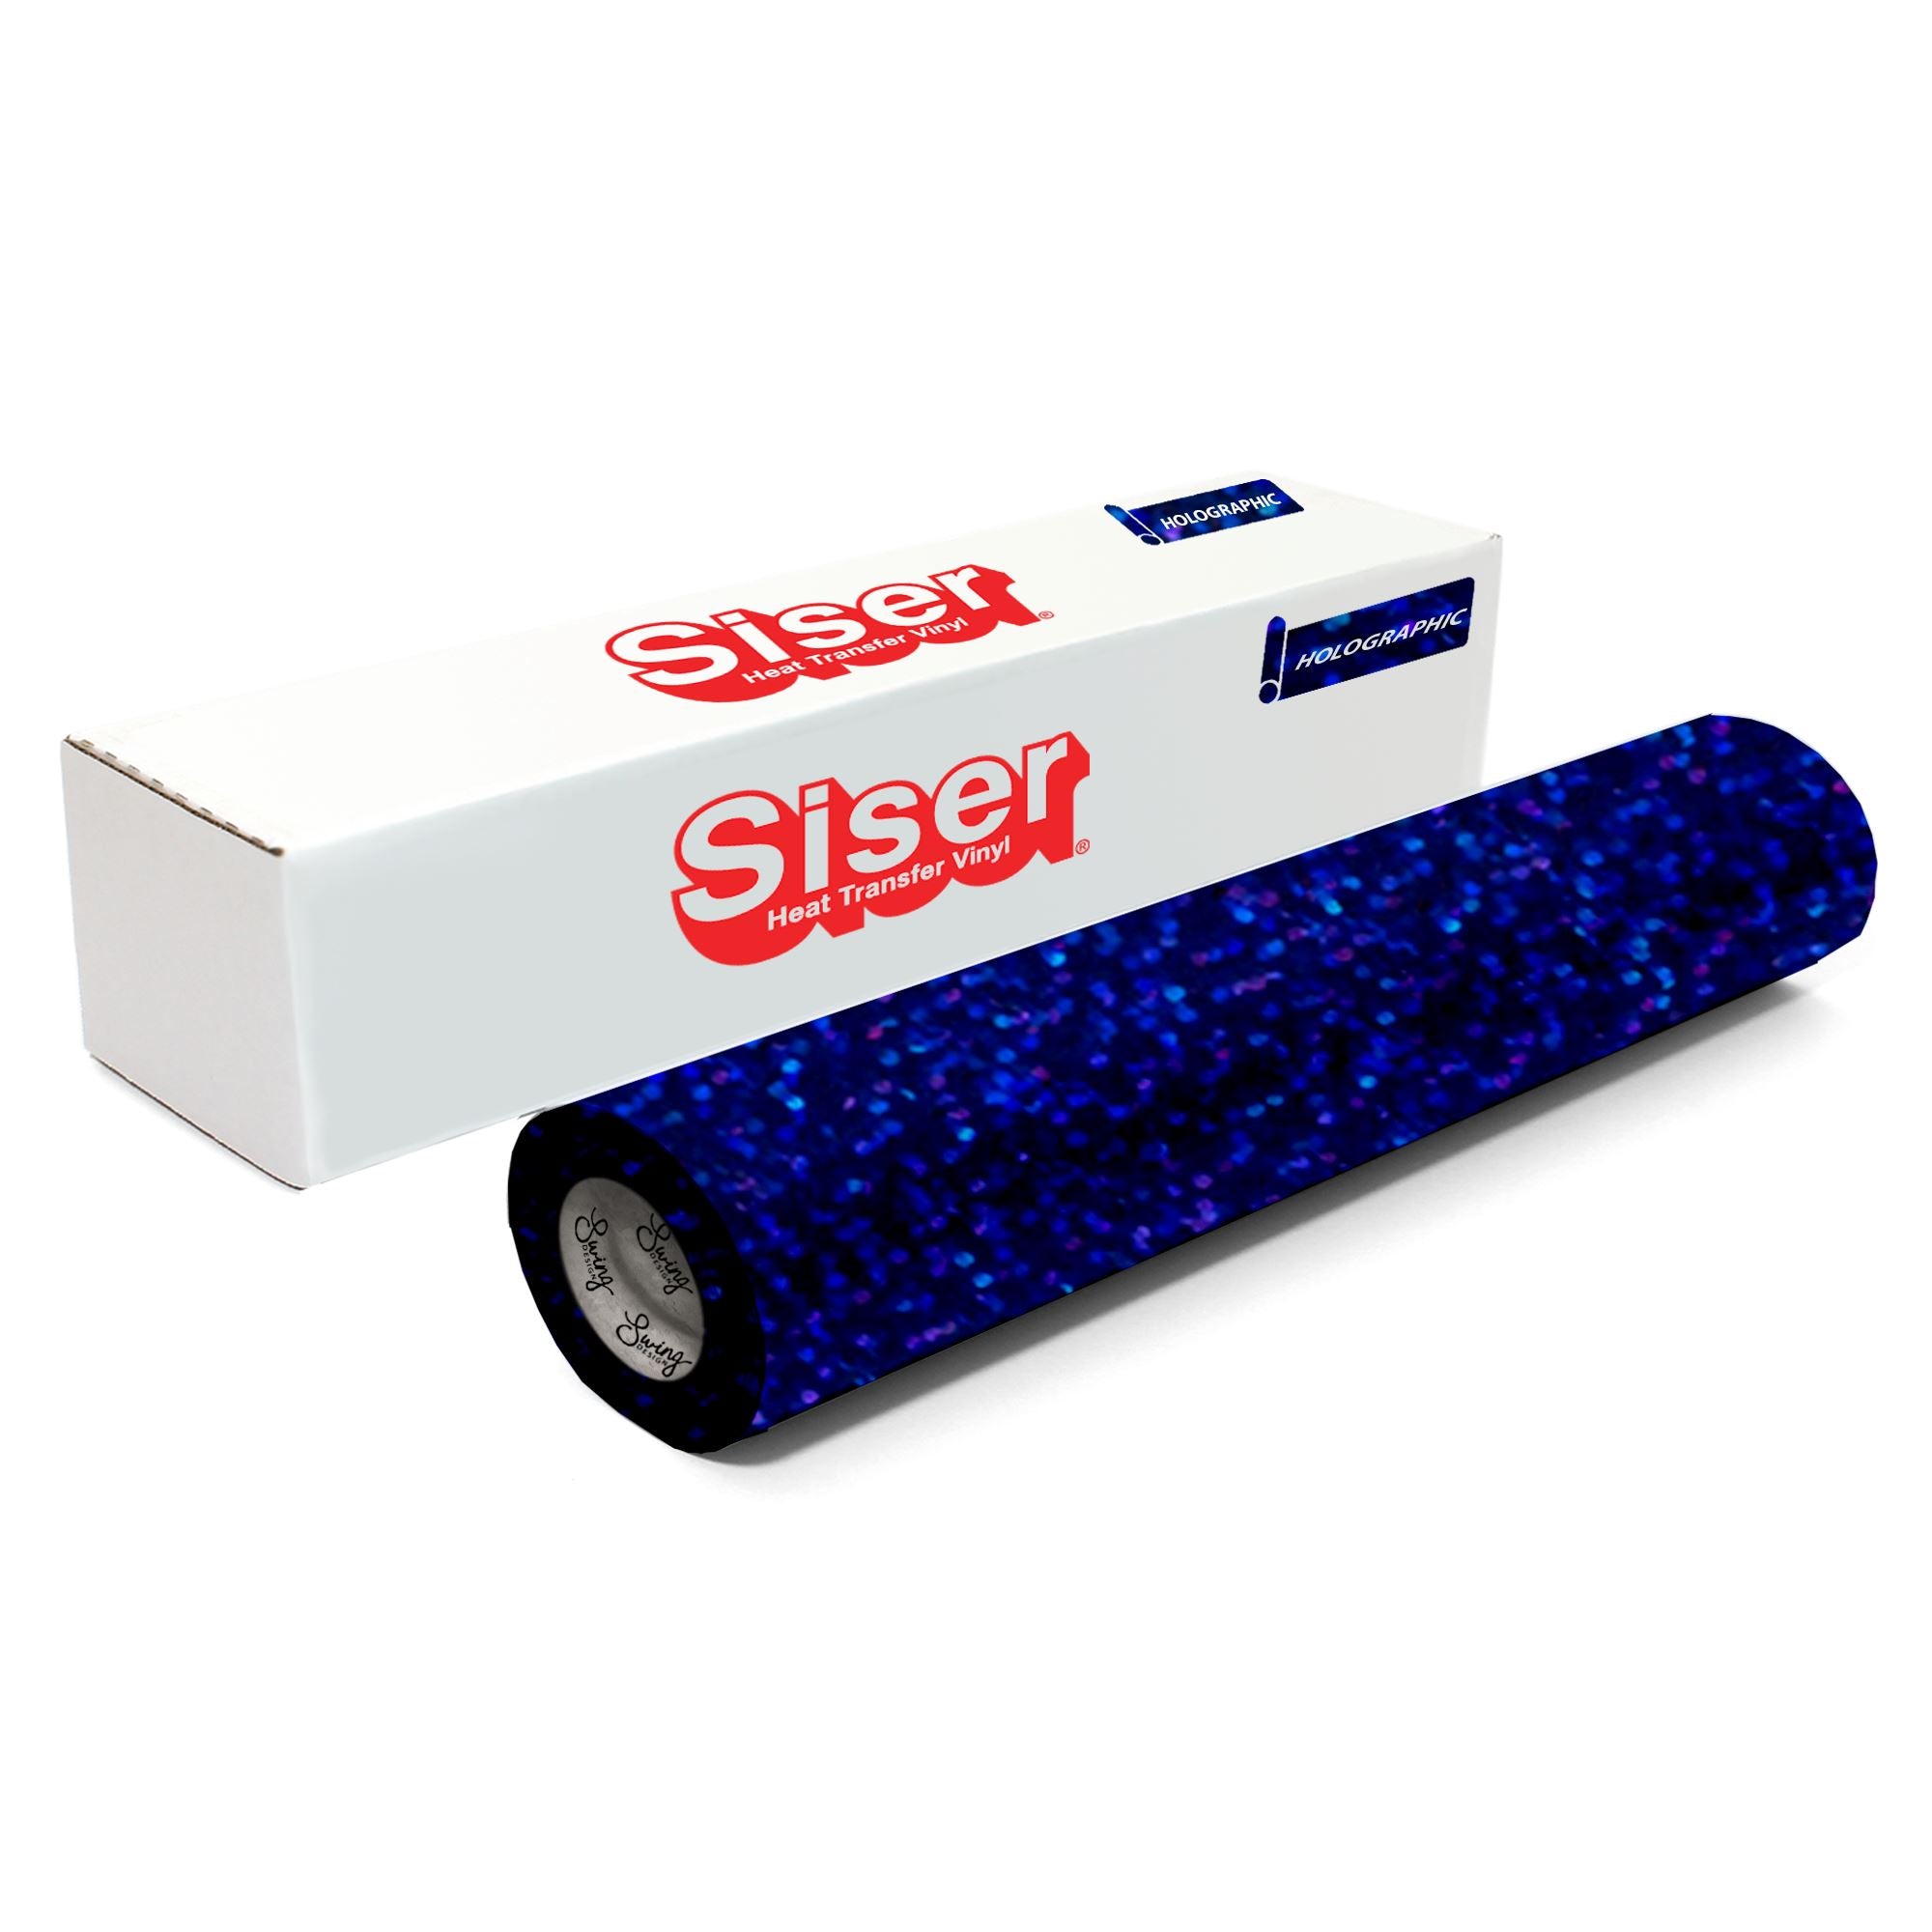 Siser Holographic Heat Transfer Vinyl (HTV) - 15 x 150 ft - 16 Colors Available, Royal Blue